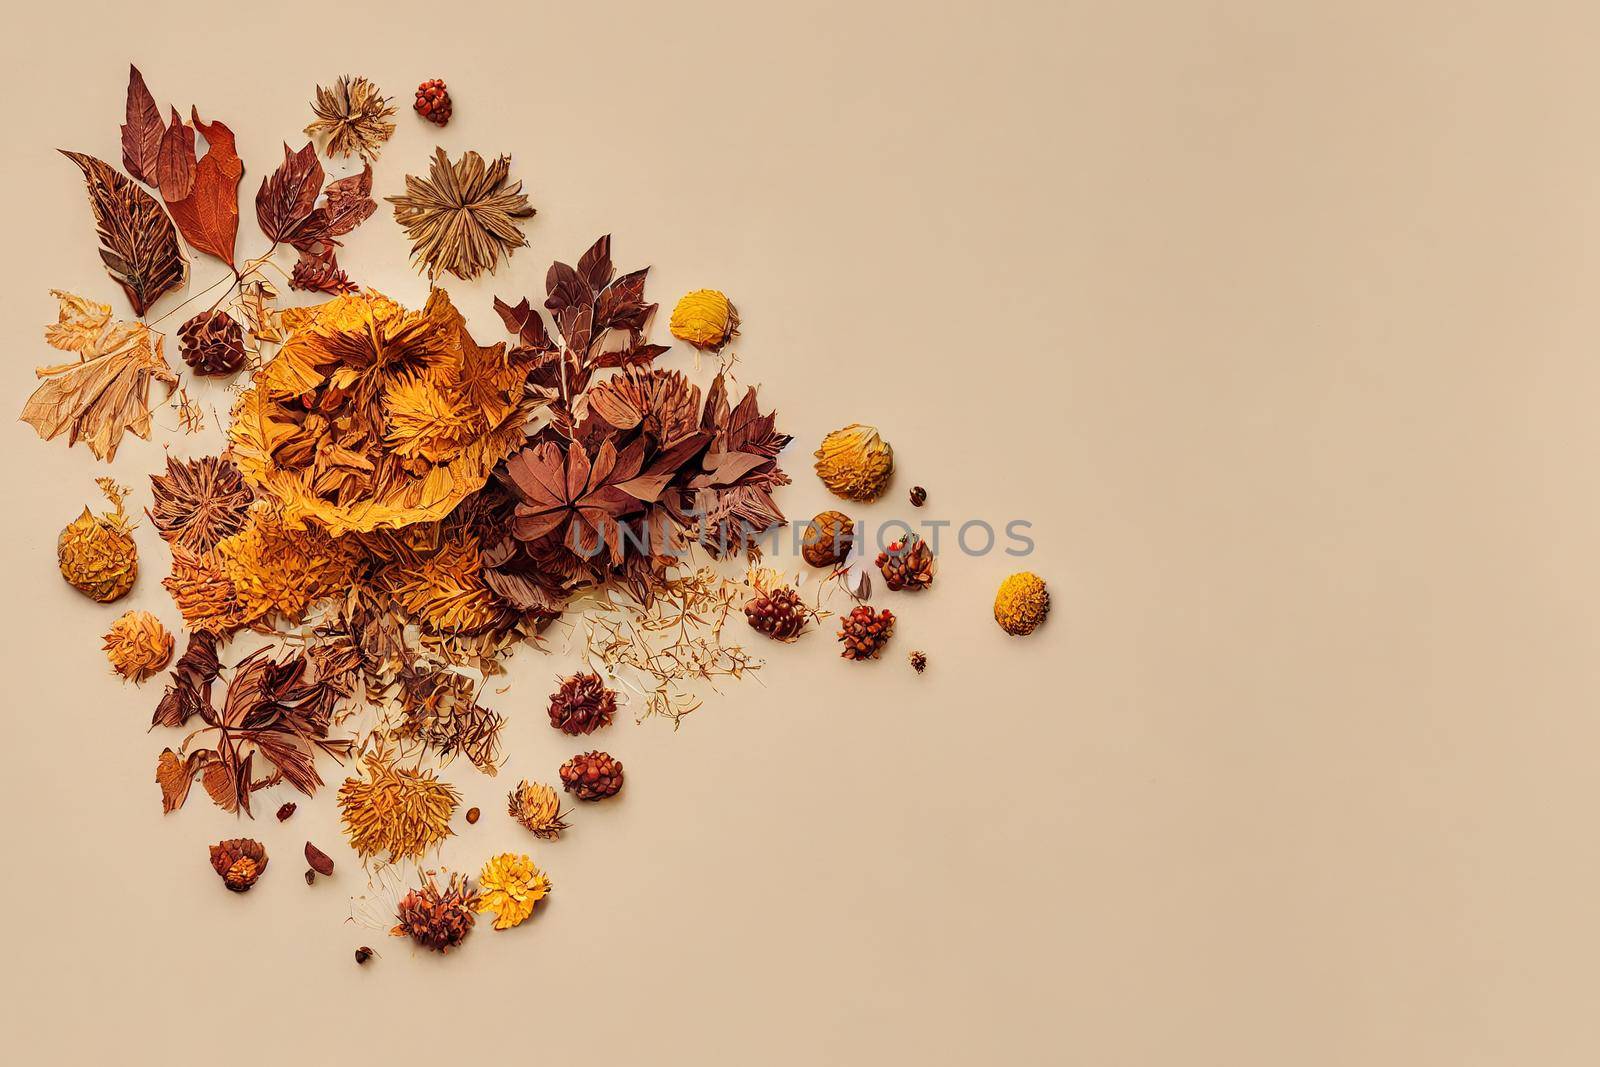 Autumn composition Pattern made of dried flowers, eucalyptus leaves, by 2ragon